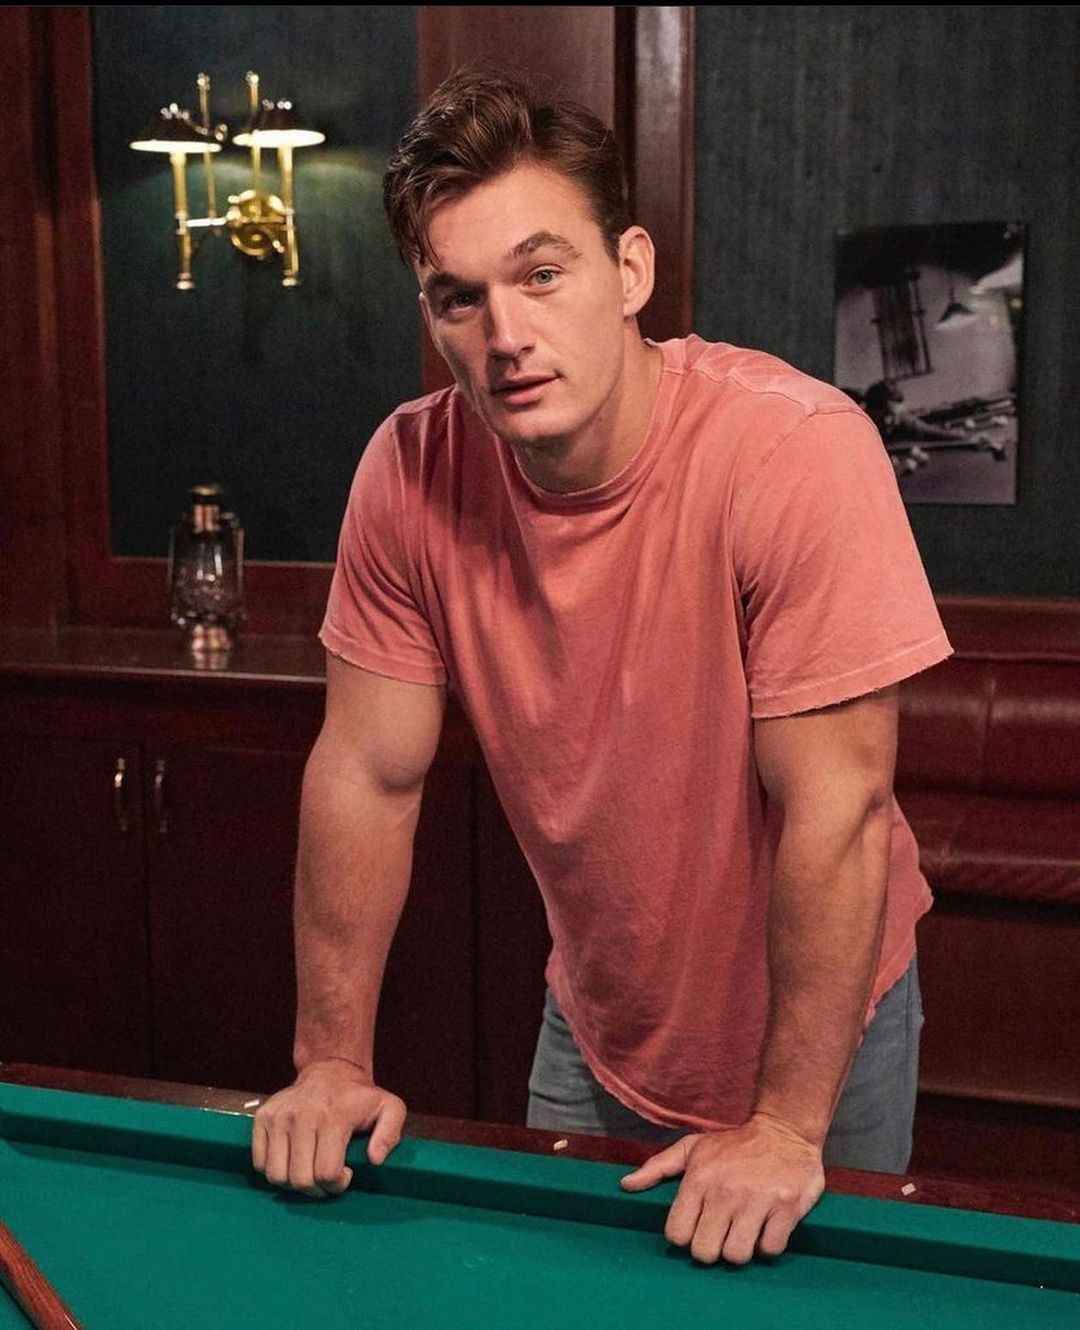 A photo of Tyler Cameron in a casual outfit, leaning on a pool table.